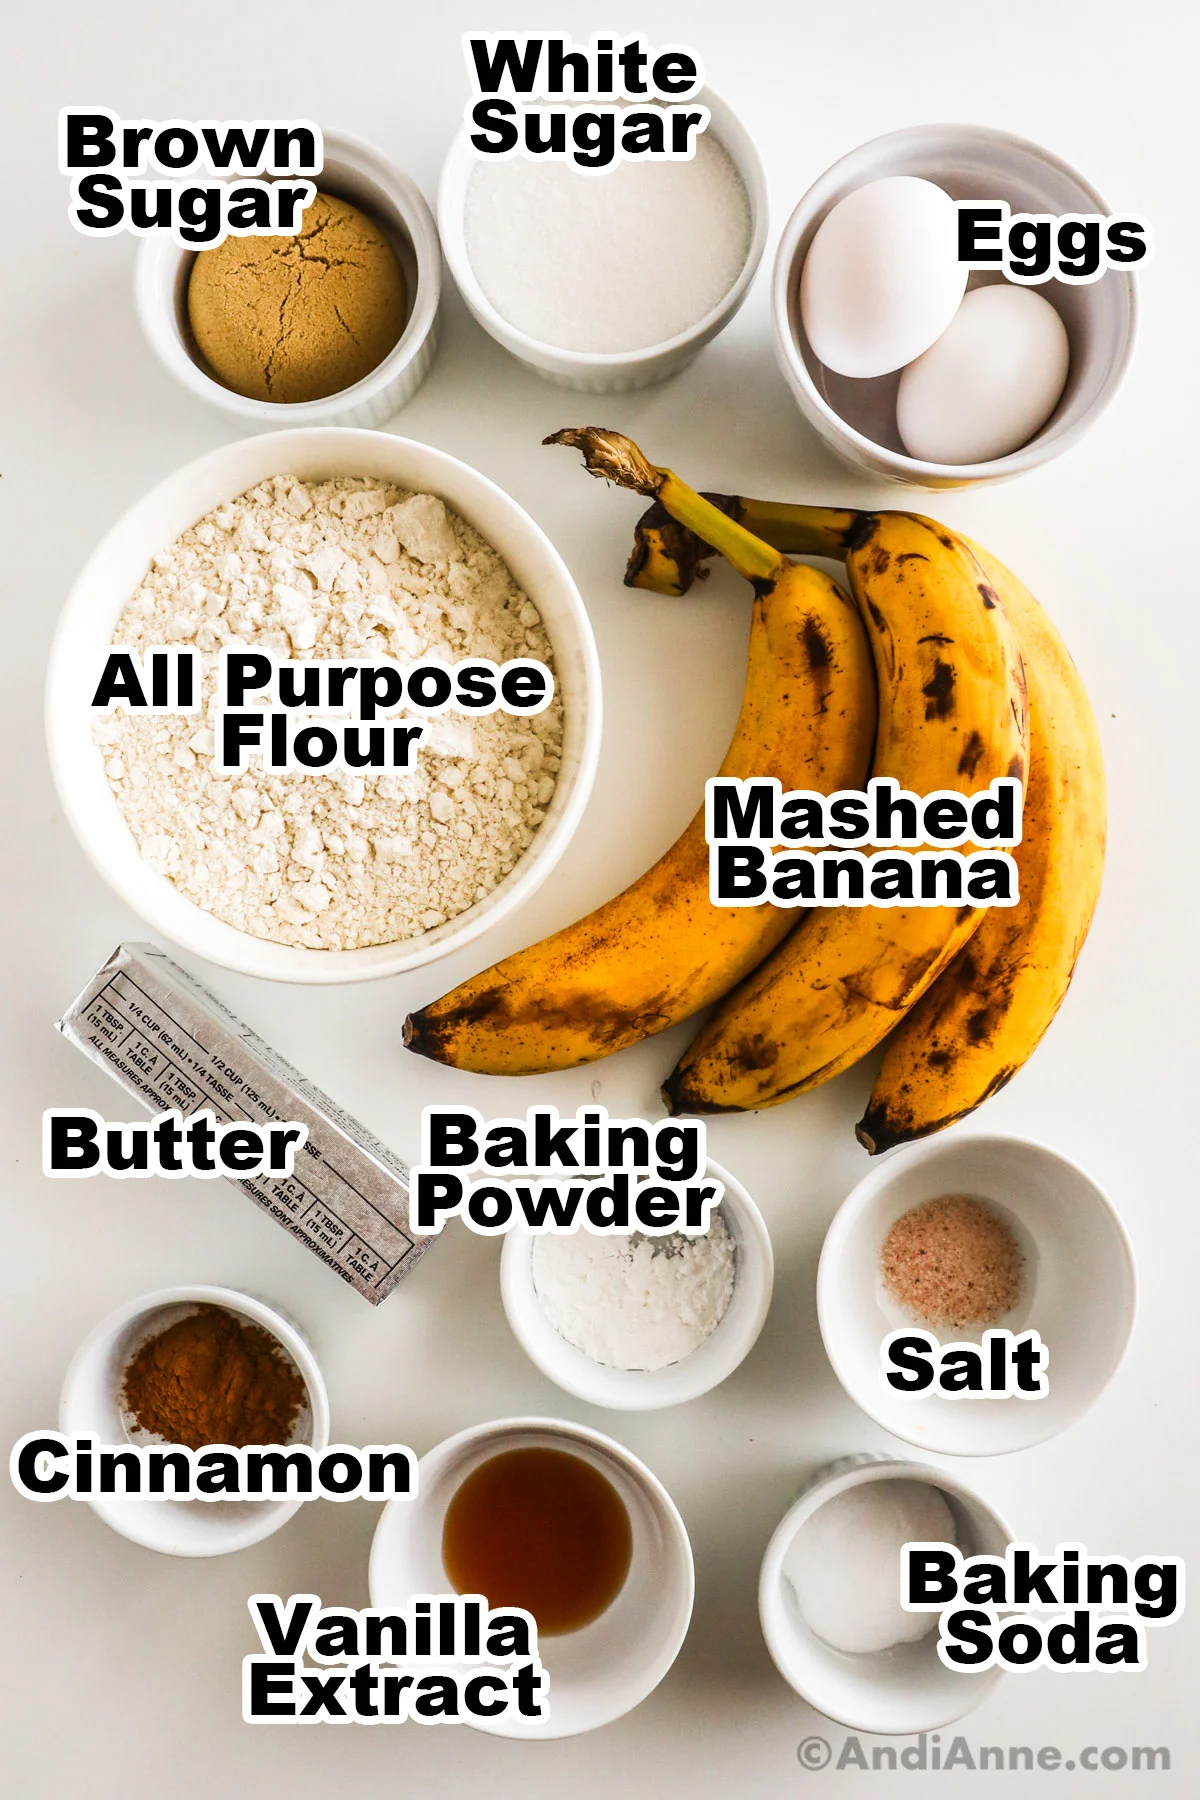 Recipe ingredients on the counter including bowls of brown sugar, white sugar, eggs, flour, ripe bananas, butter, baking powder, salt, cinnamon and baking soda.